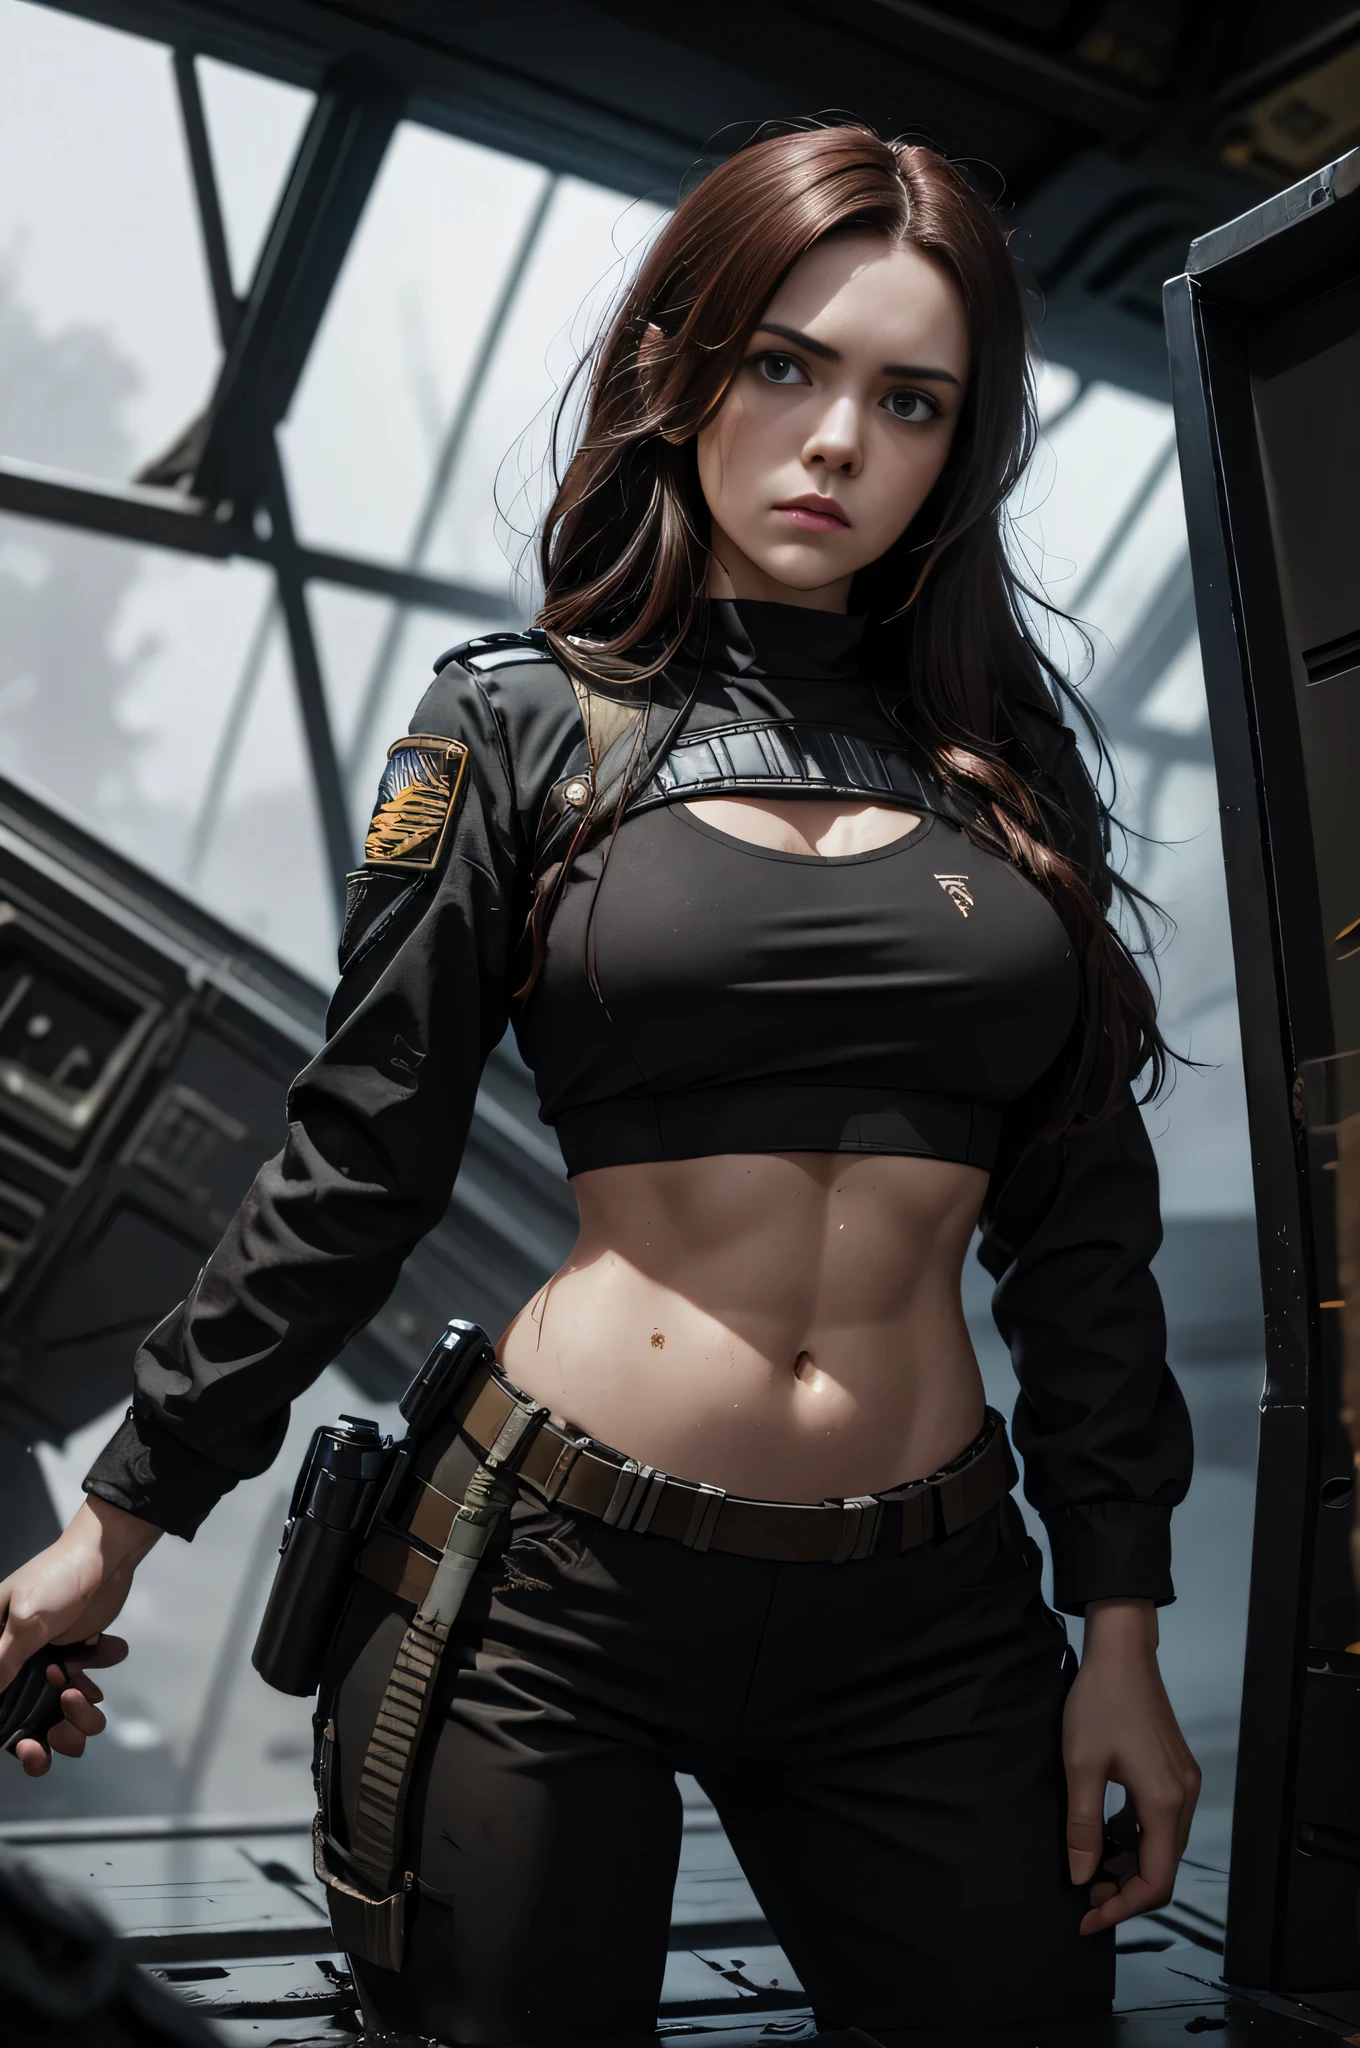 A beautiful female TIE pilot prisonner of Jabba the Hut, The TIE fighter pilot's standard black uniform was tattered and covered in mud. Large pieces of fabric had been torn off during the ordeal of traveling here, including her left sleeve, part of the area covering her midriff, and nearly her entire right trouser pant leg. Even her right boot had gone missing, causing the lieutenant to go partially barefoot. Her top was also nearly falling off, exposing her black sports bra underneath. Her dark red hair was similarly disheveled and plastered to her face with days’ old sweat. Worst of all, she had dropped her blaster pistol in a particularly deep bog yesterday, leaving her largely defenseless. digital painting, ArtStation, Concept art, smooth, sharp focus, illustration, Illustration by Wlop, Charlie Bowater and Alexandra Fomina